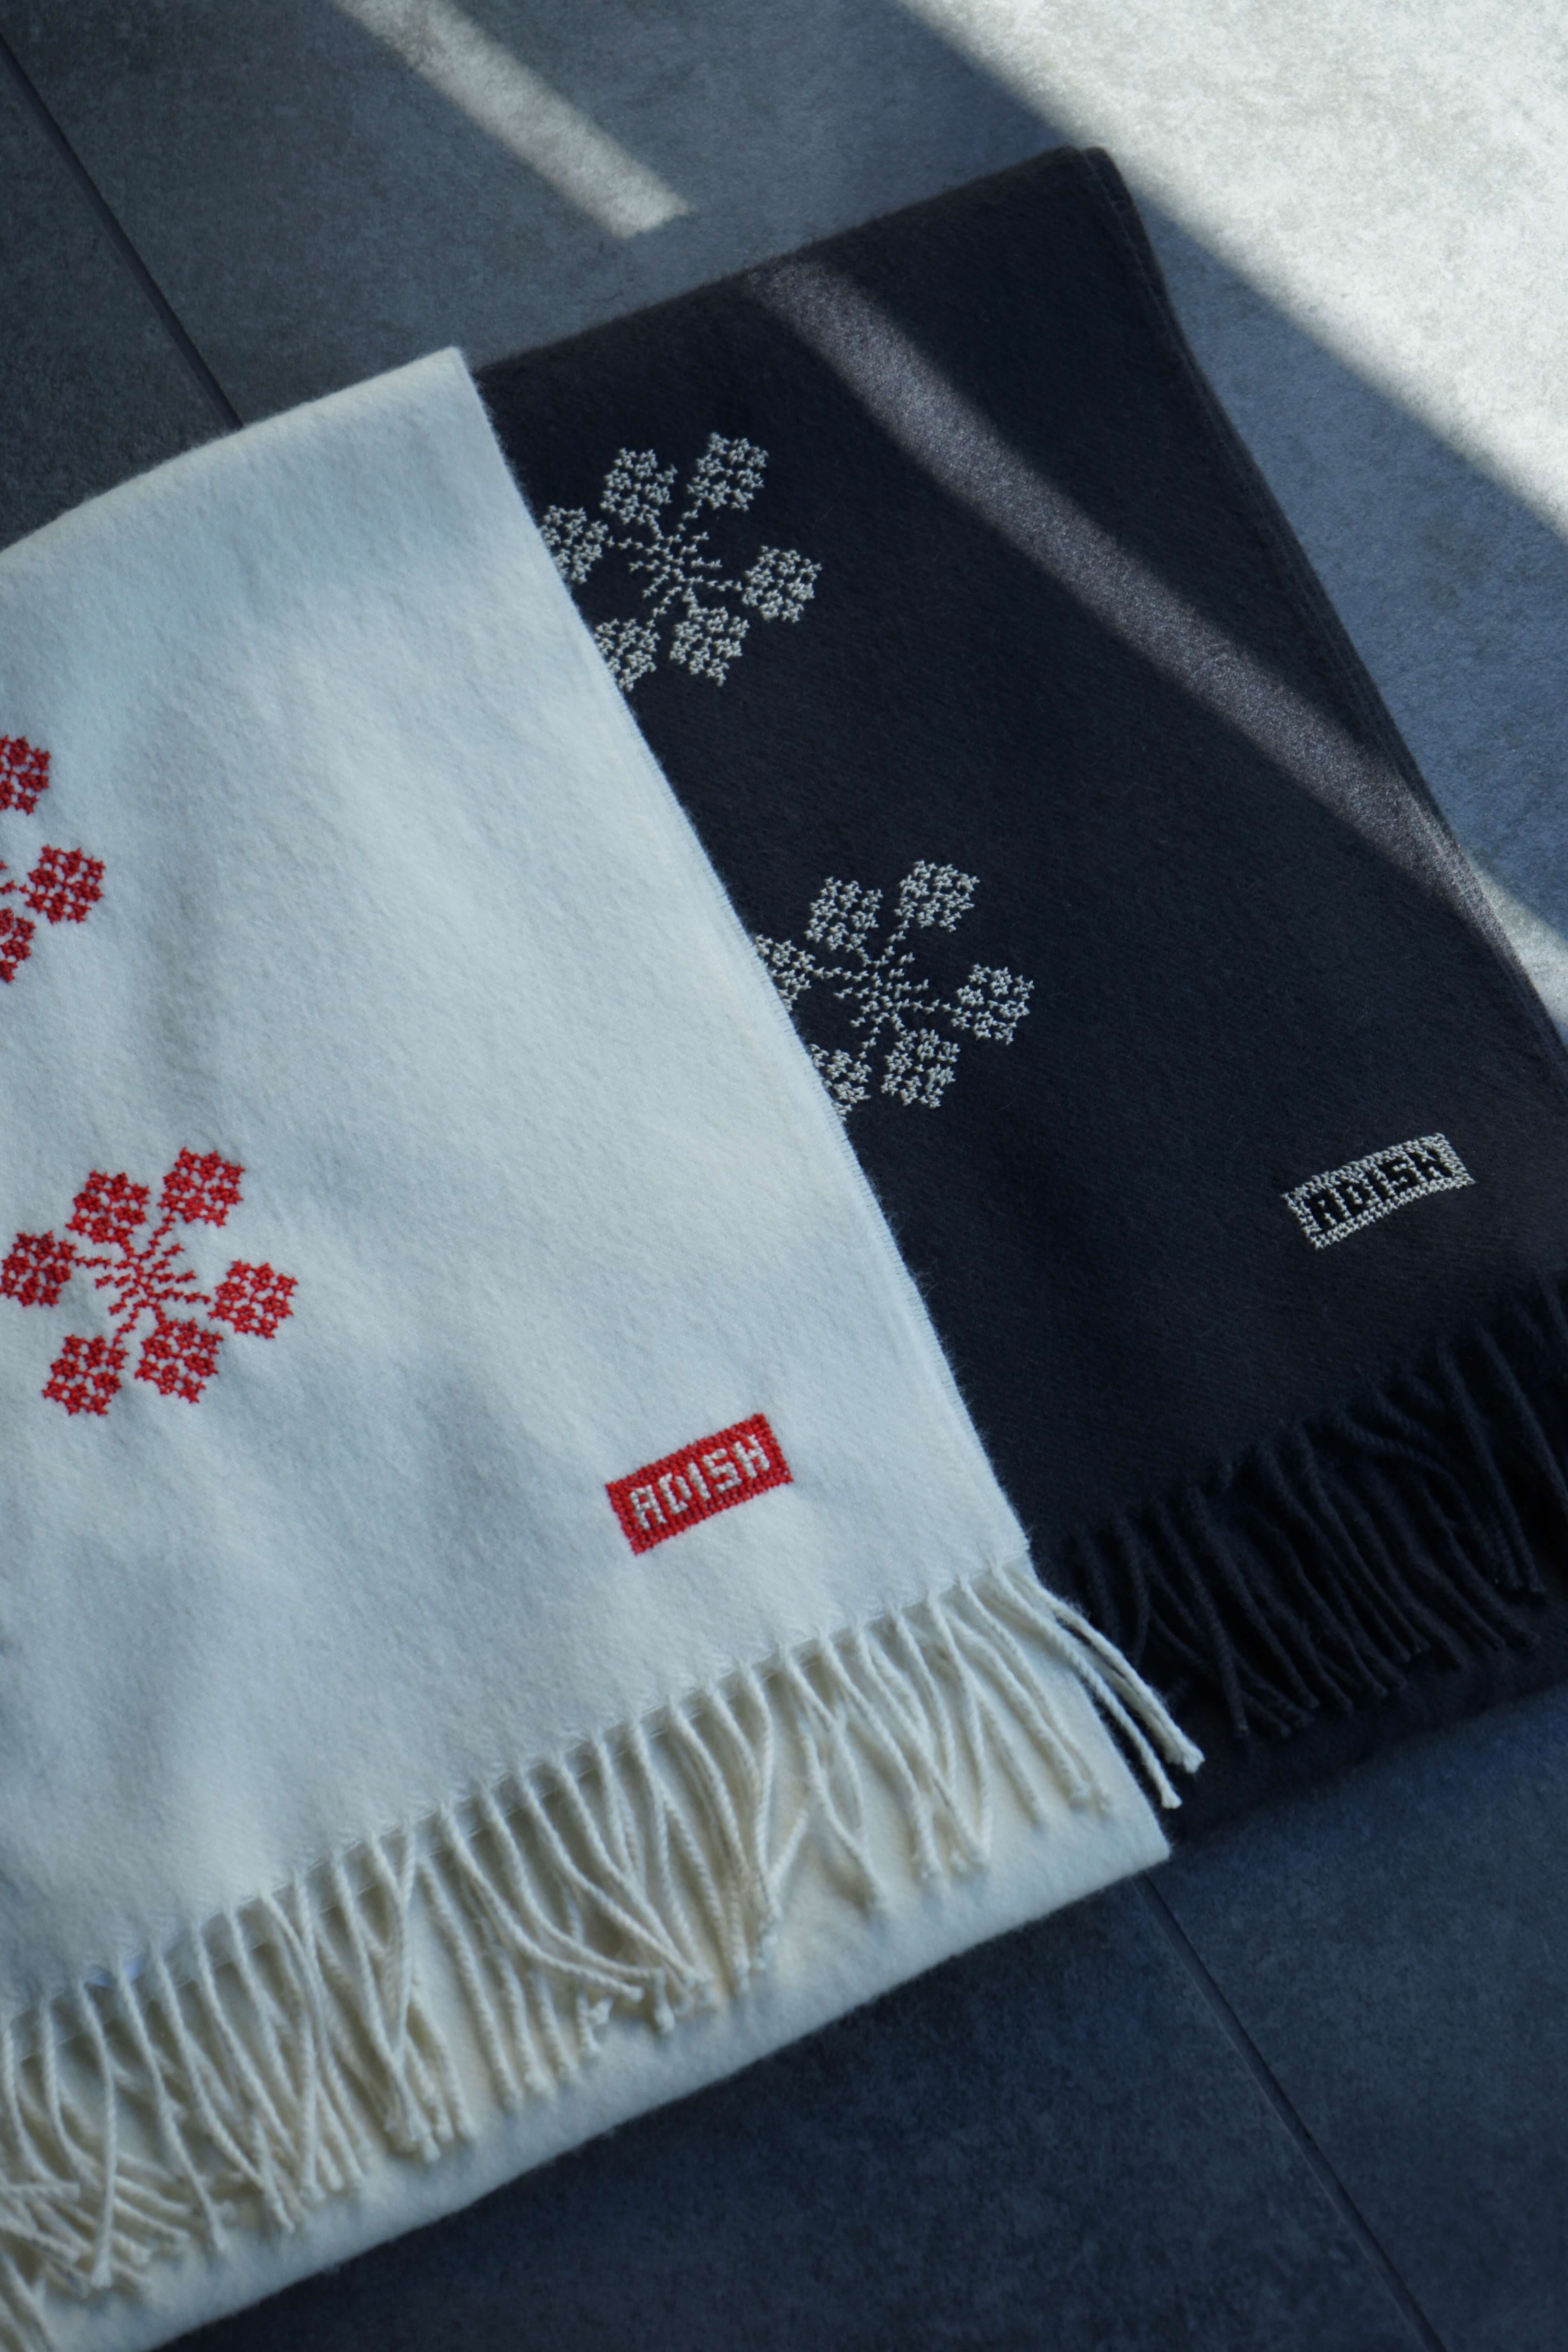 THE INOUE BROTHERS UP-CYCLED ALPACA SCARF - WHITE